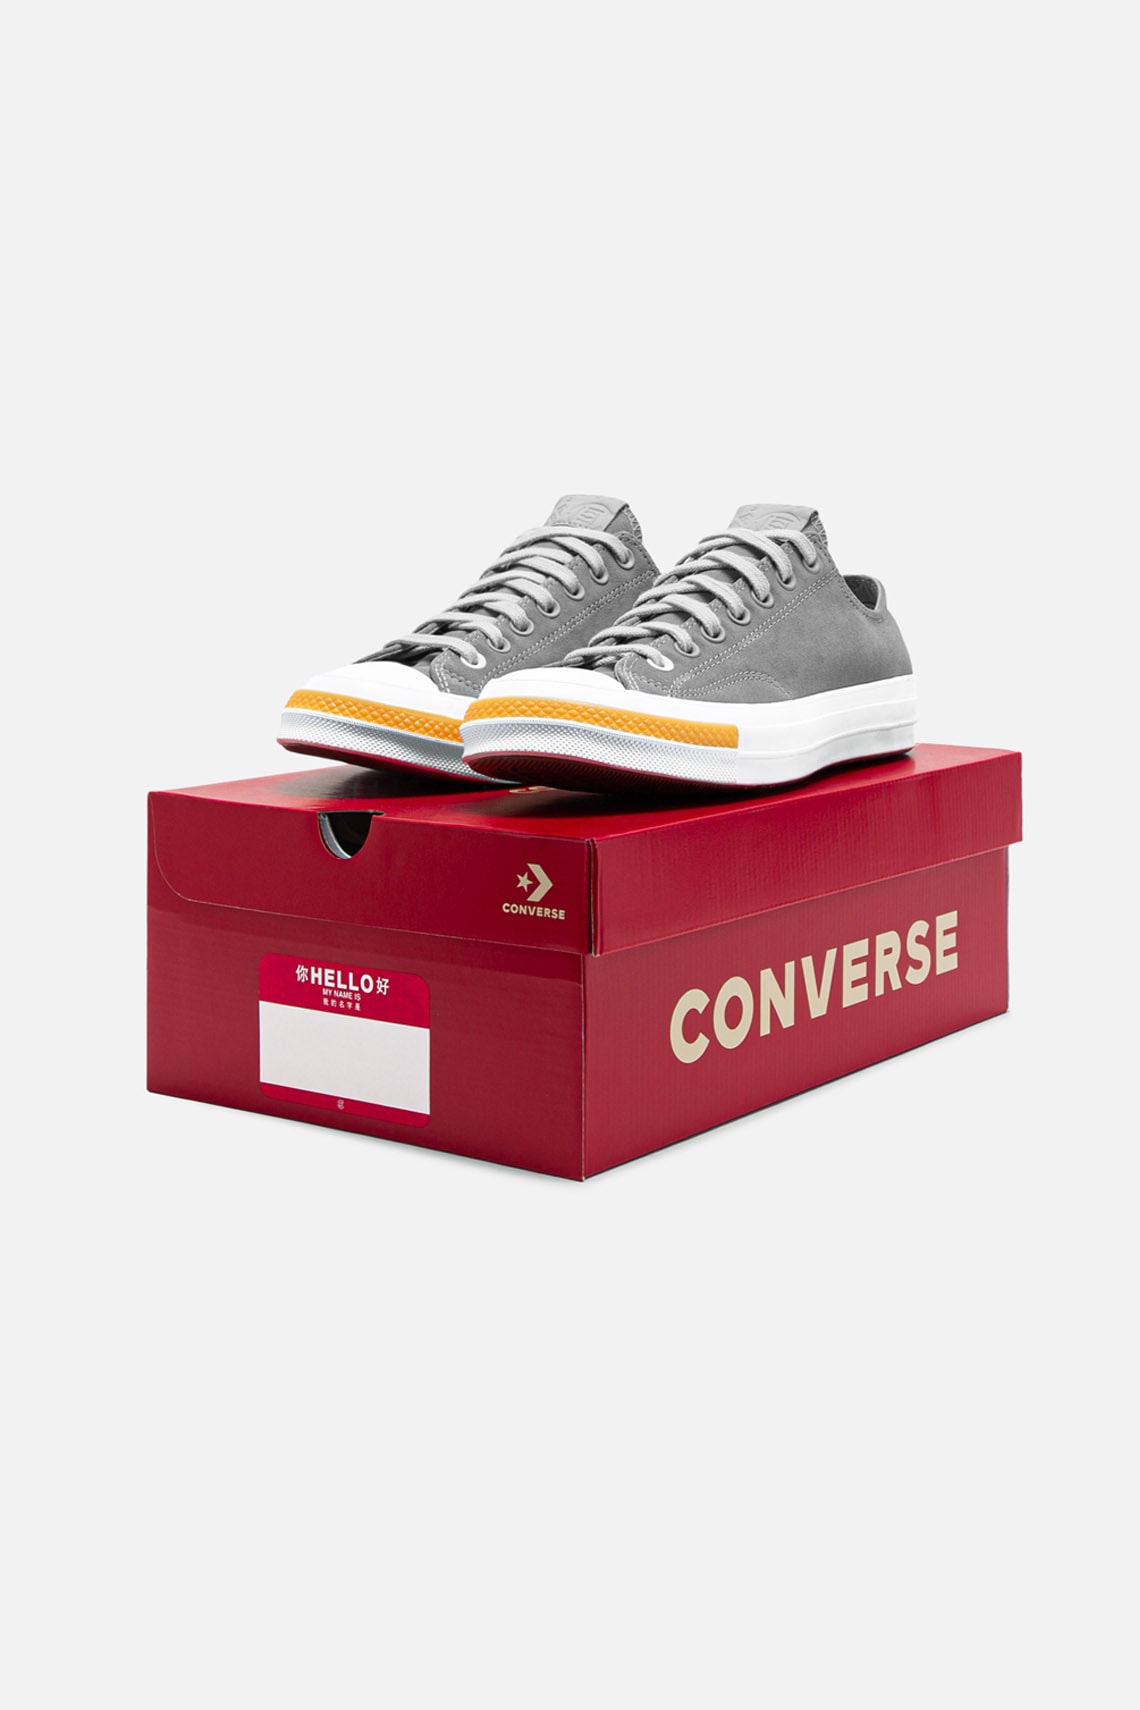 CLOT x Converse Chuck 70 Hi and Ox Collaboration Sneakers Paloma Gray White